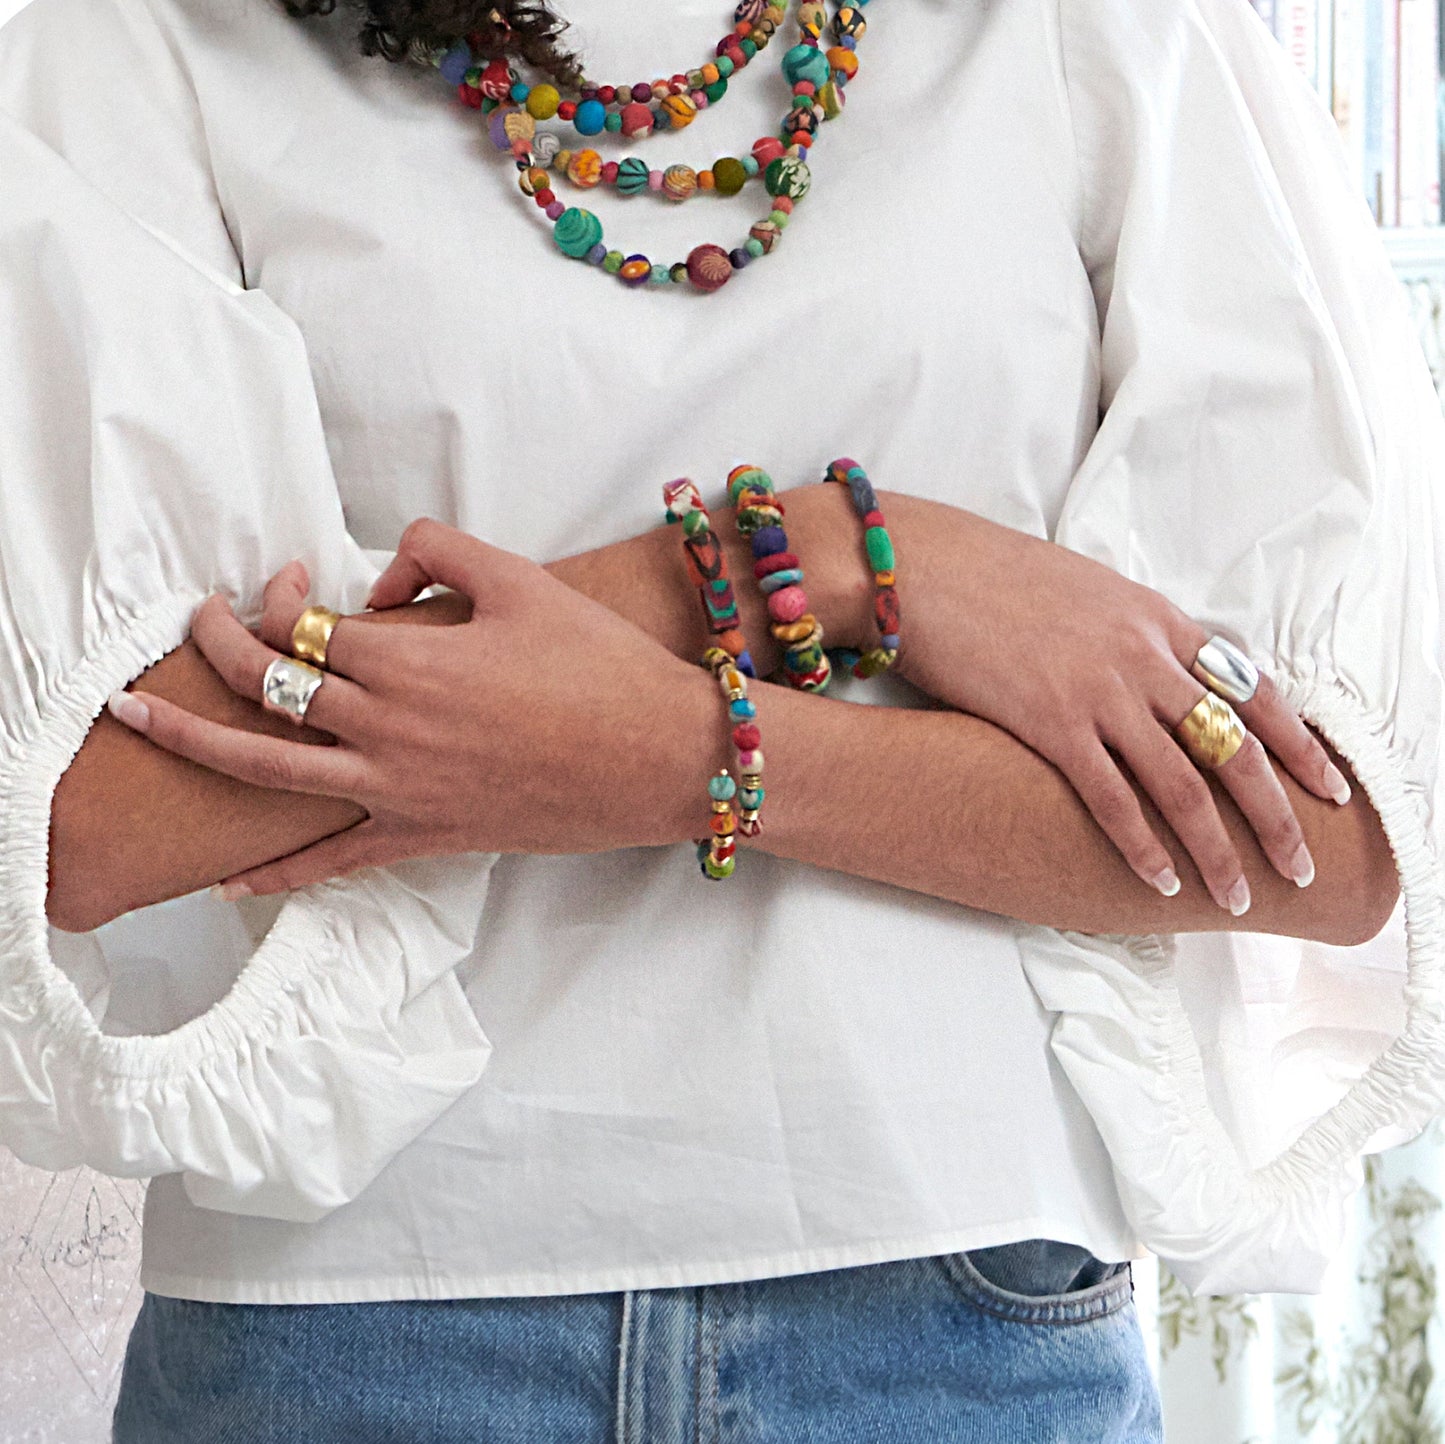 A woman crosses her arms across her chest, showing a stack of colorful beaded bracelets and metallic rings.